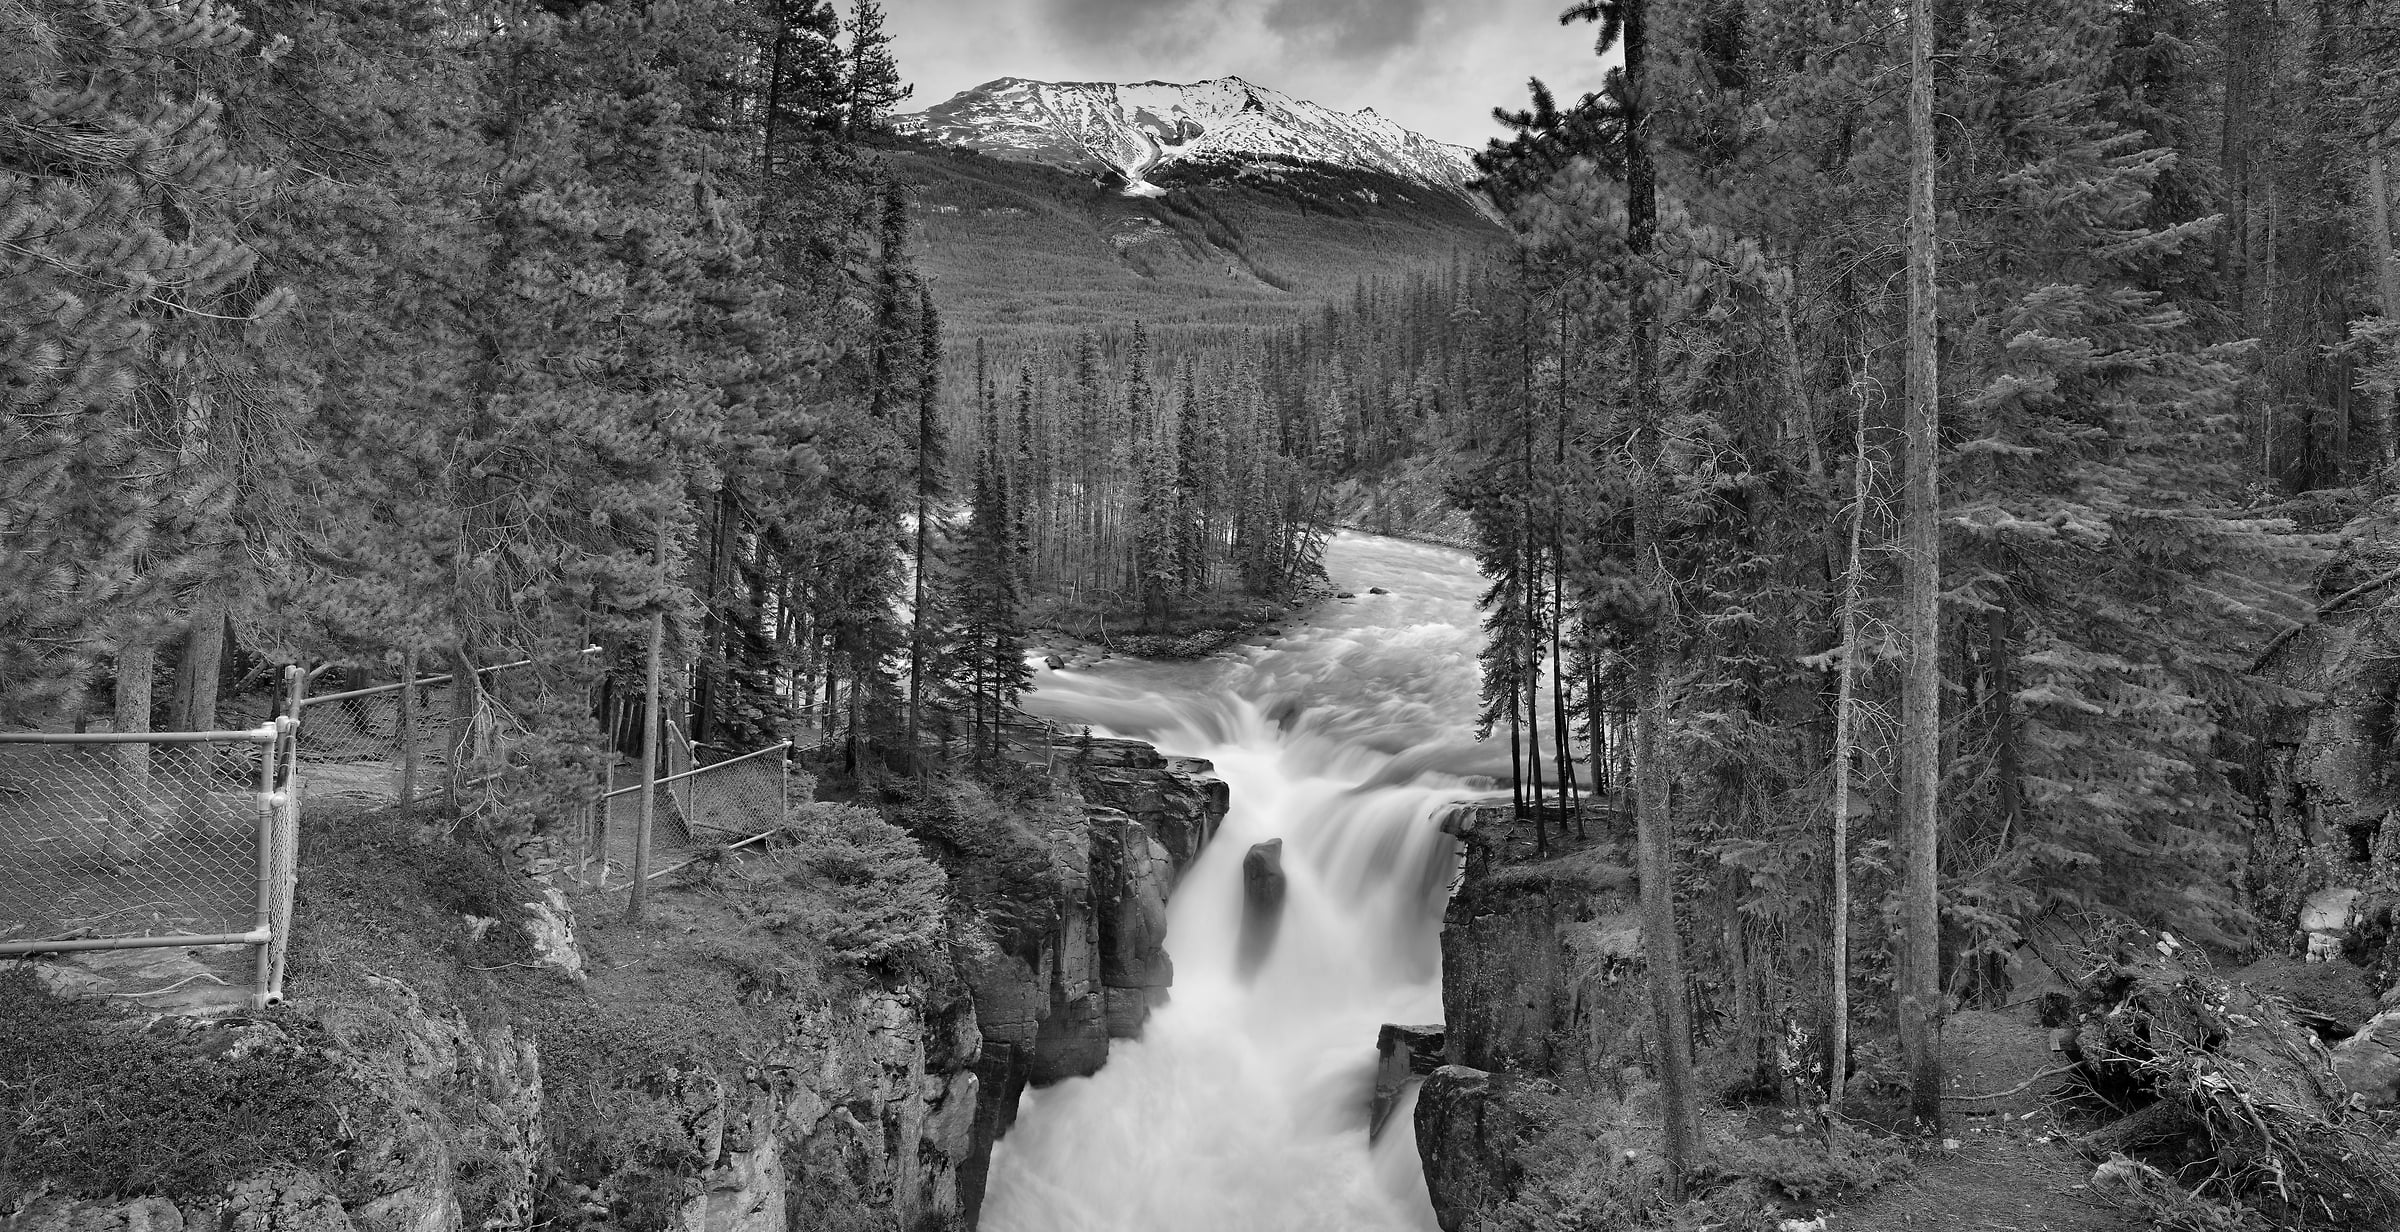 1,682 megapixels! A very high resolution, large-format VAST photo print of woods and a waterfall; black & white photograph created by Steve Webster in Sunwapta Falls, Jasper National Park, Alberta, Canada.